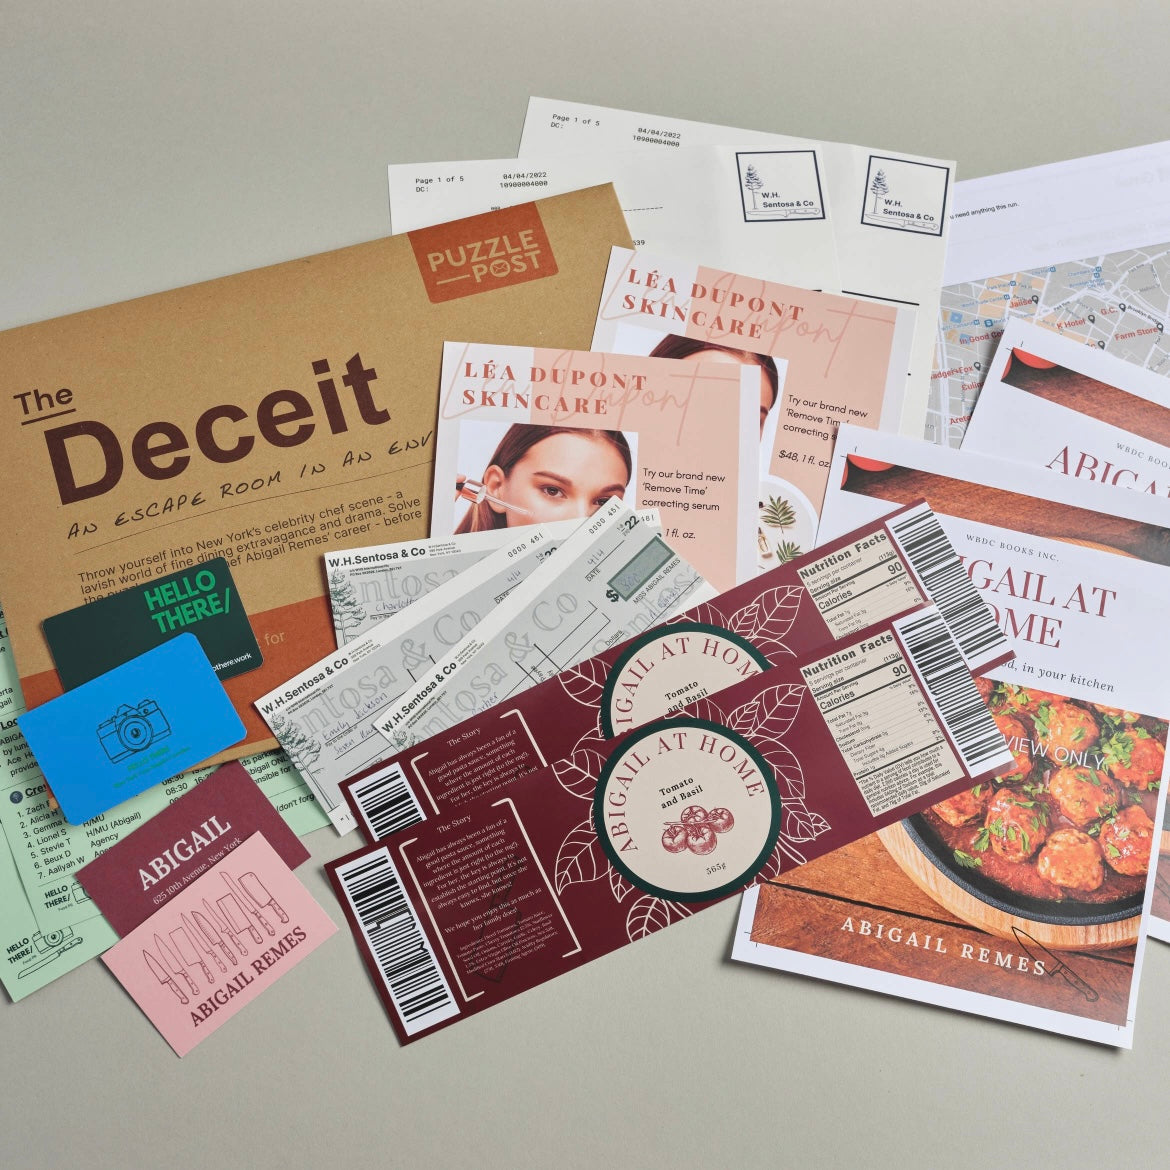 Escape Room in an Envelope: The Deceit